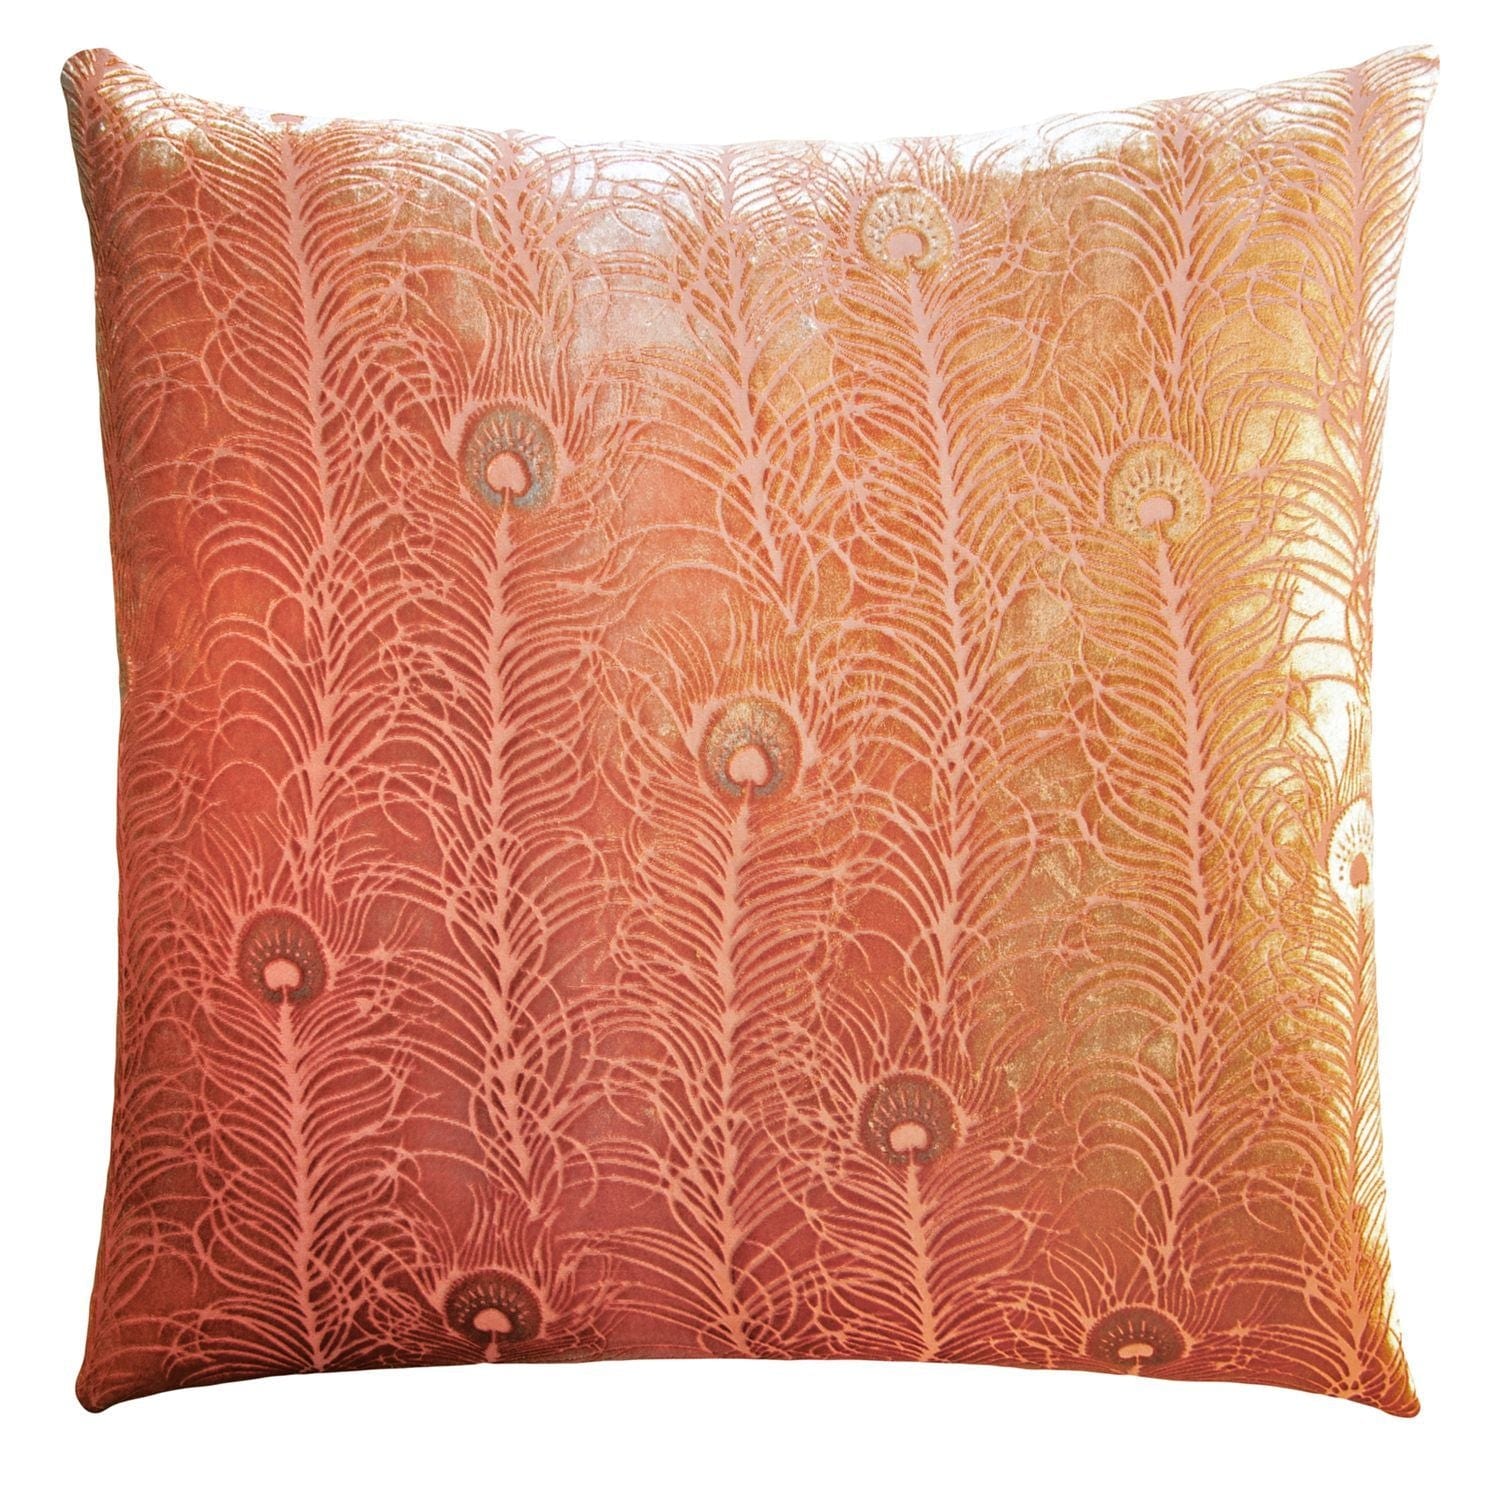 Fig Linens - Mango Peacock Feather Decorative Pillow by Kevin O'Brien Studio